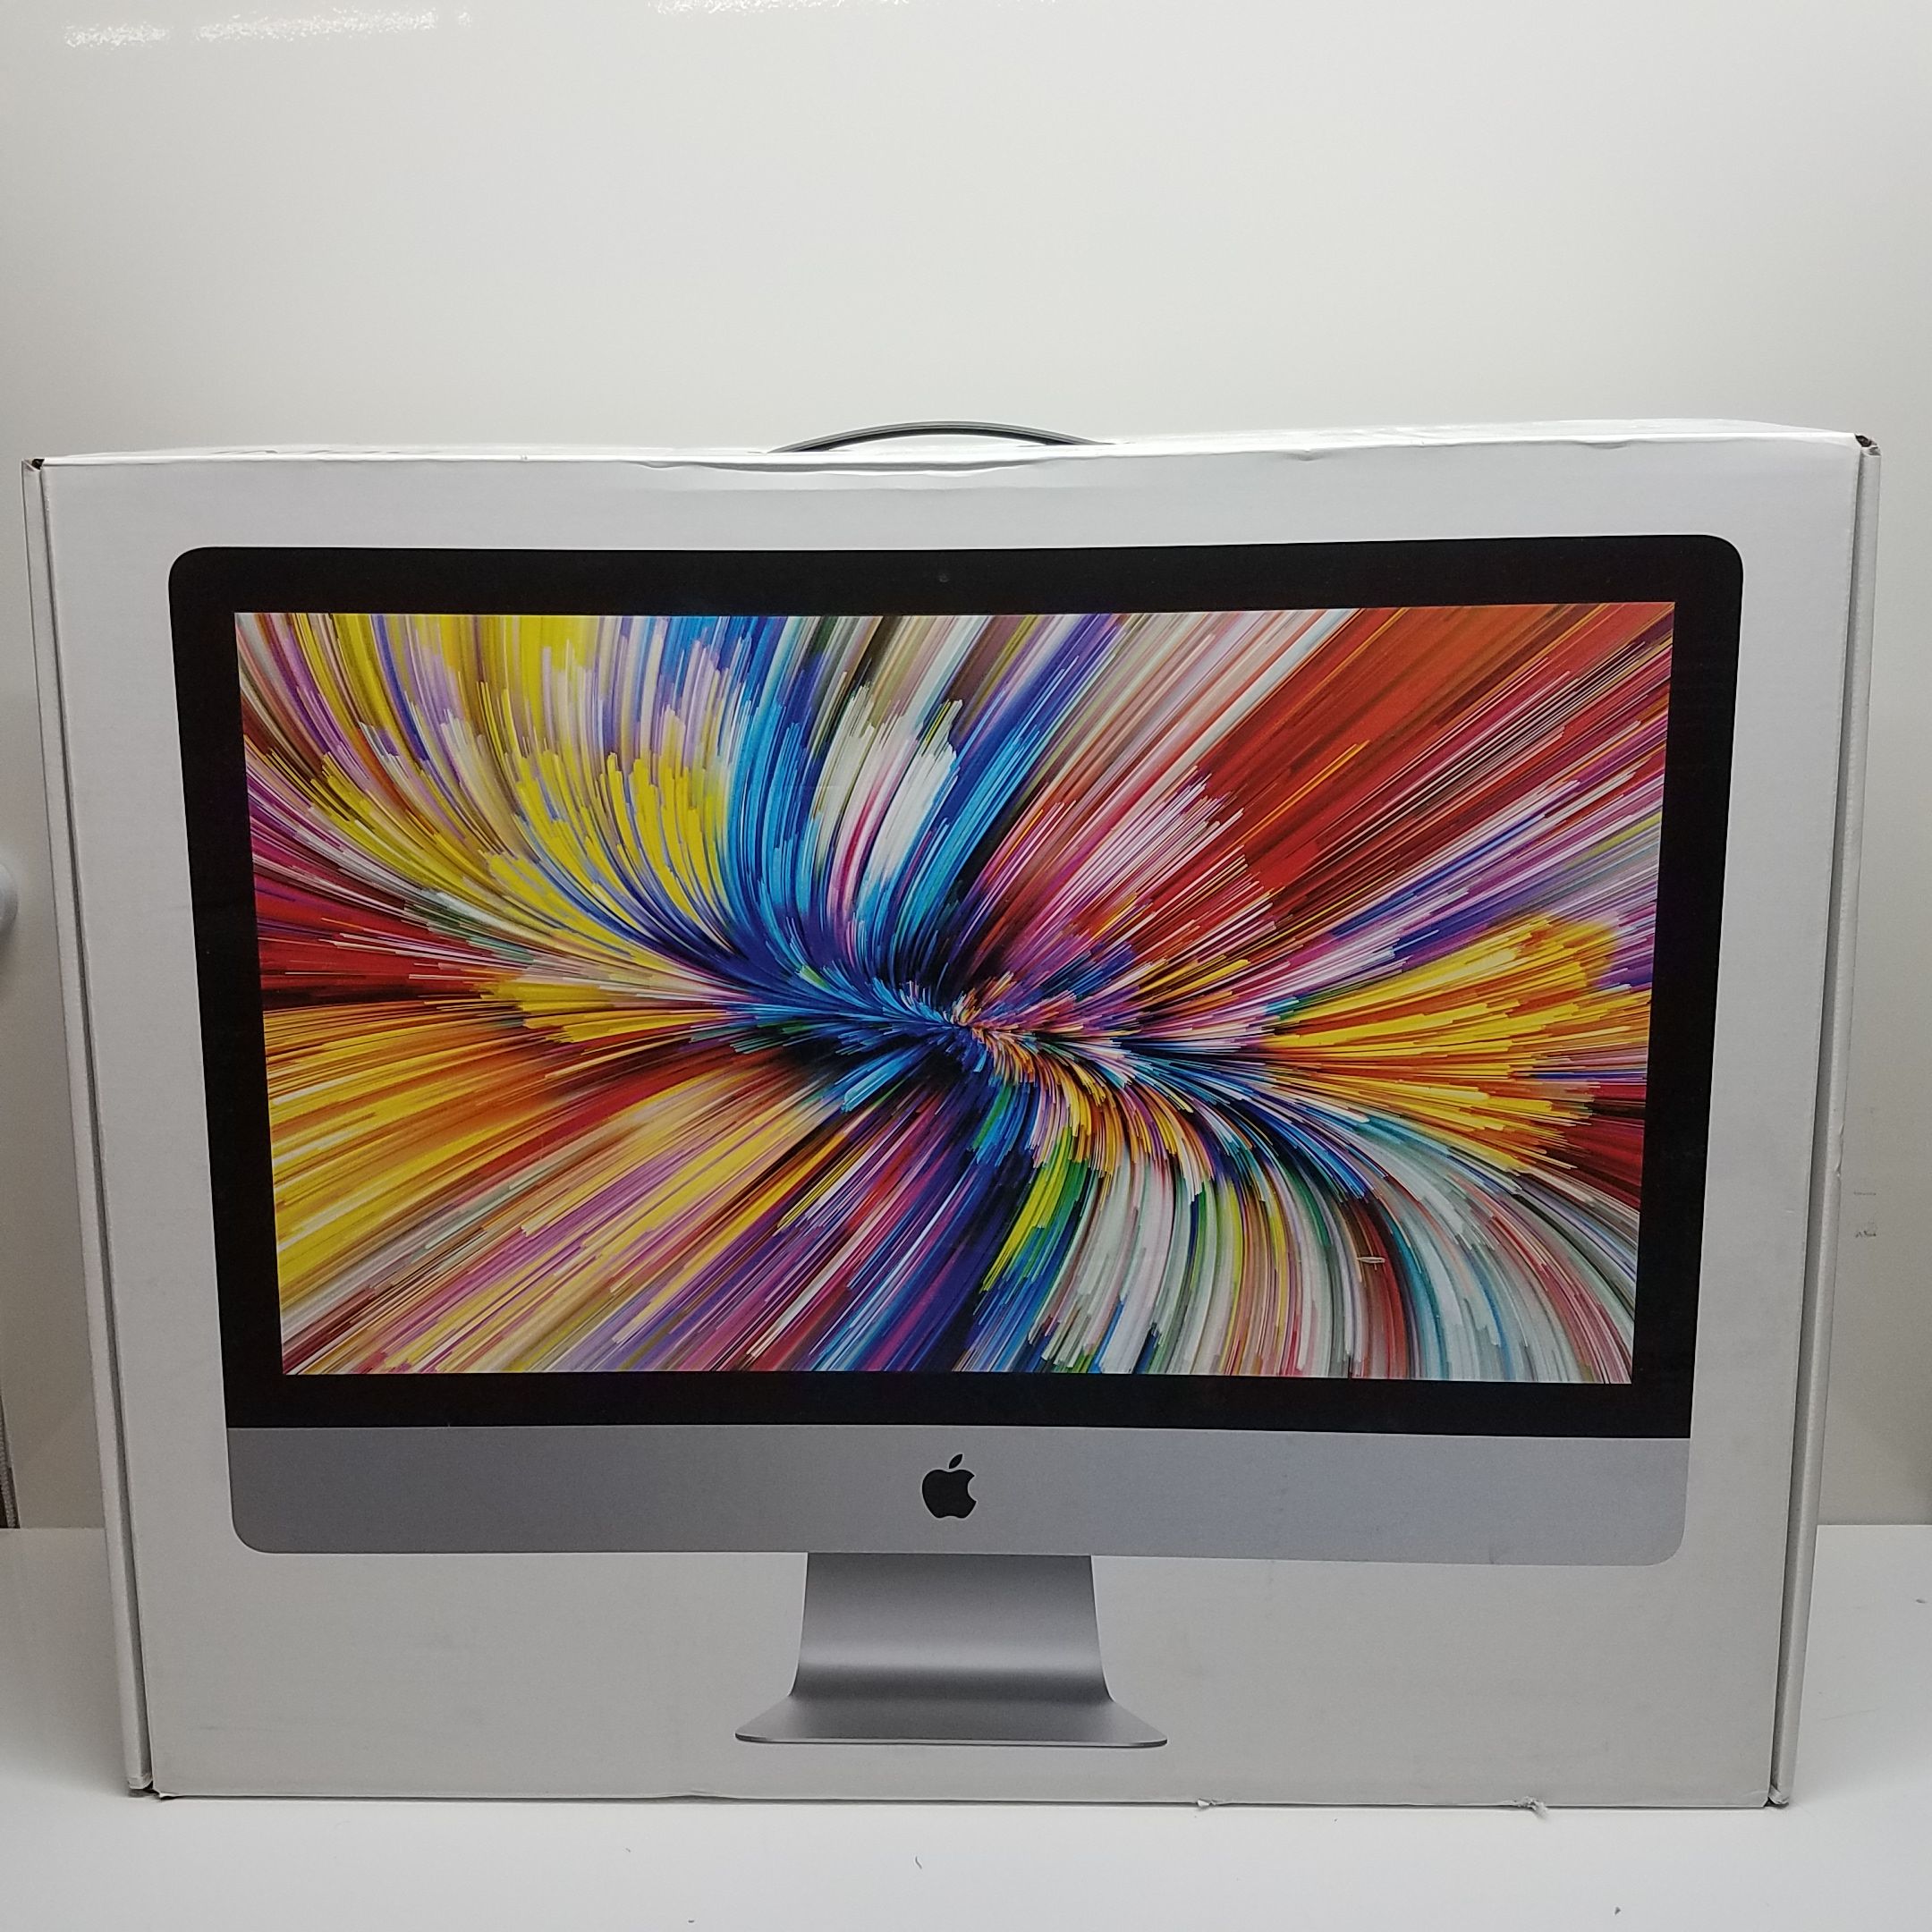 Buy 2019 27 inch iMac All-in-One Desktop PC Intel Core i9-9900K CPU 16GB  RAM 512GB HDD for USD 899.99 | GoodwillFinds